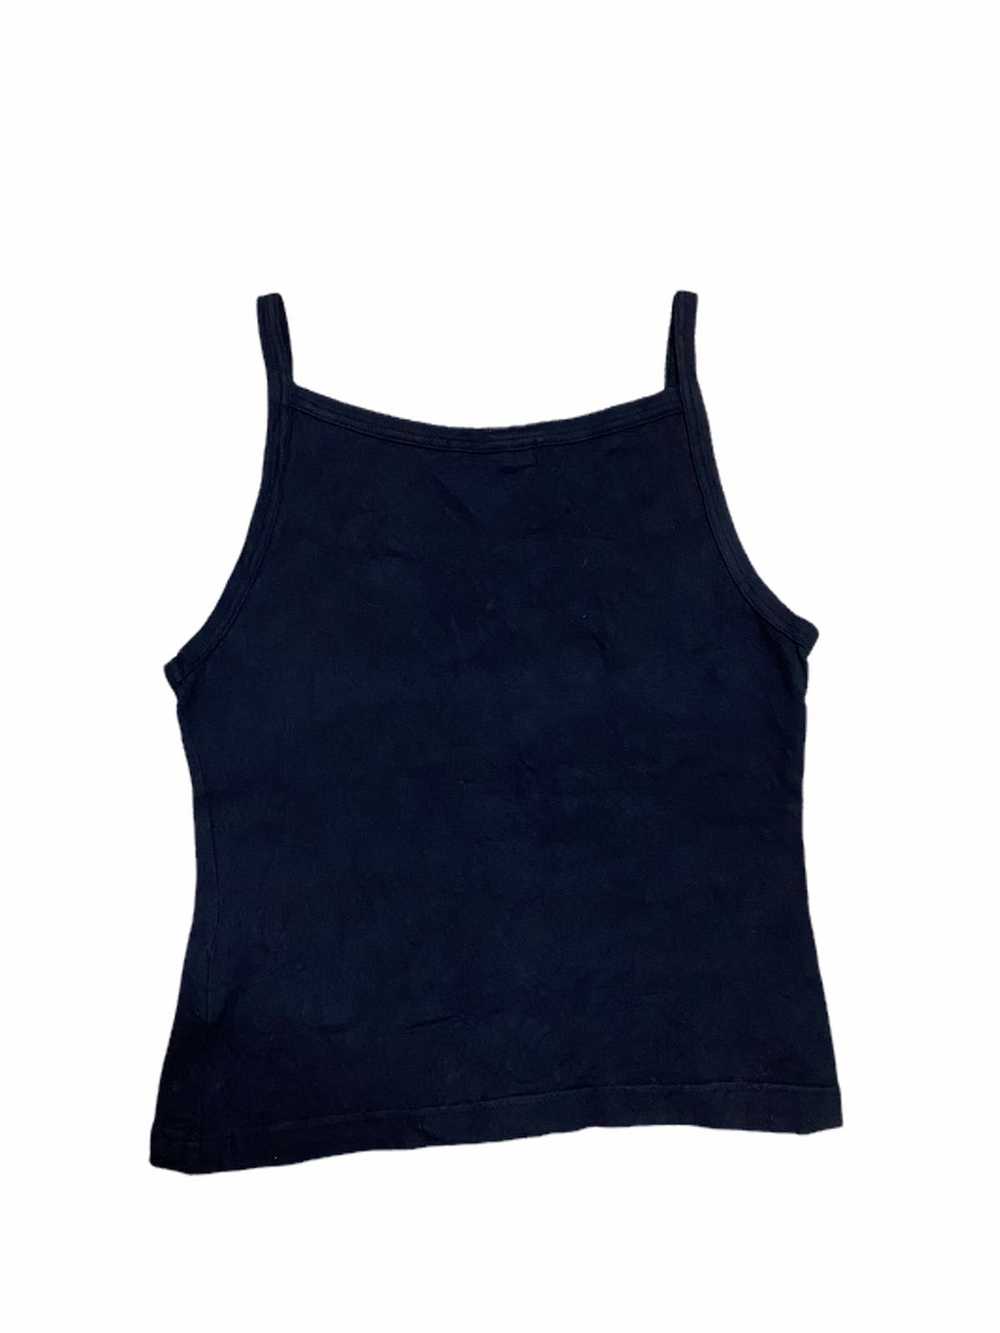 Japanese Brand SUPER LOVERS Tank Top for ladies - image 2